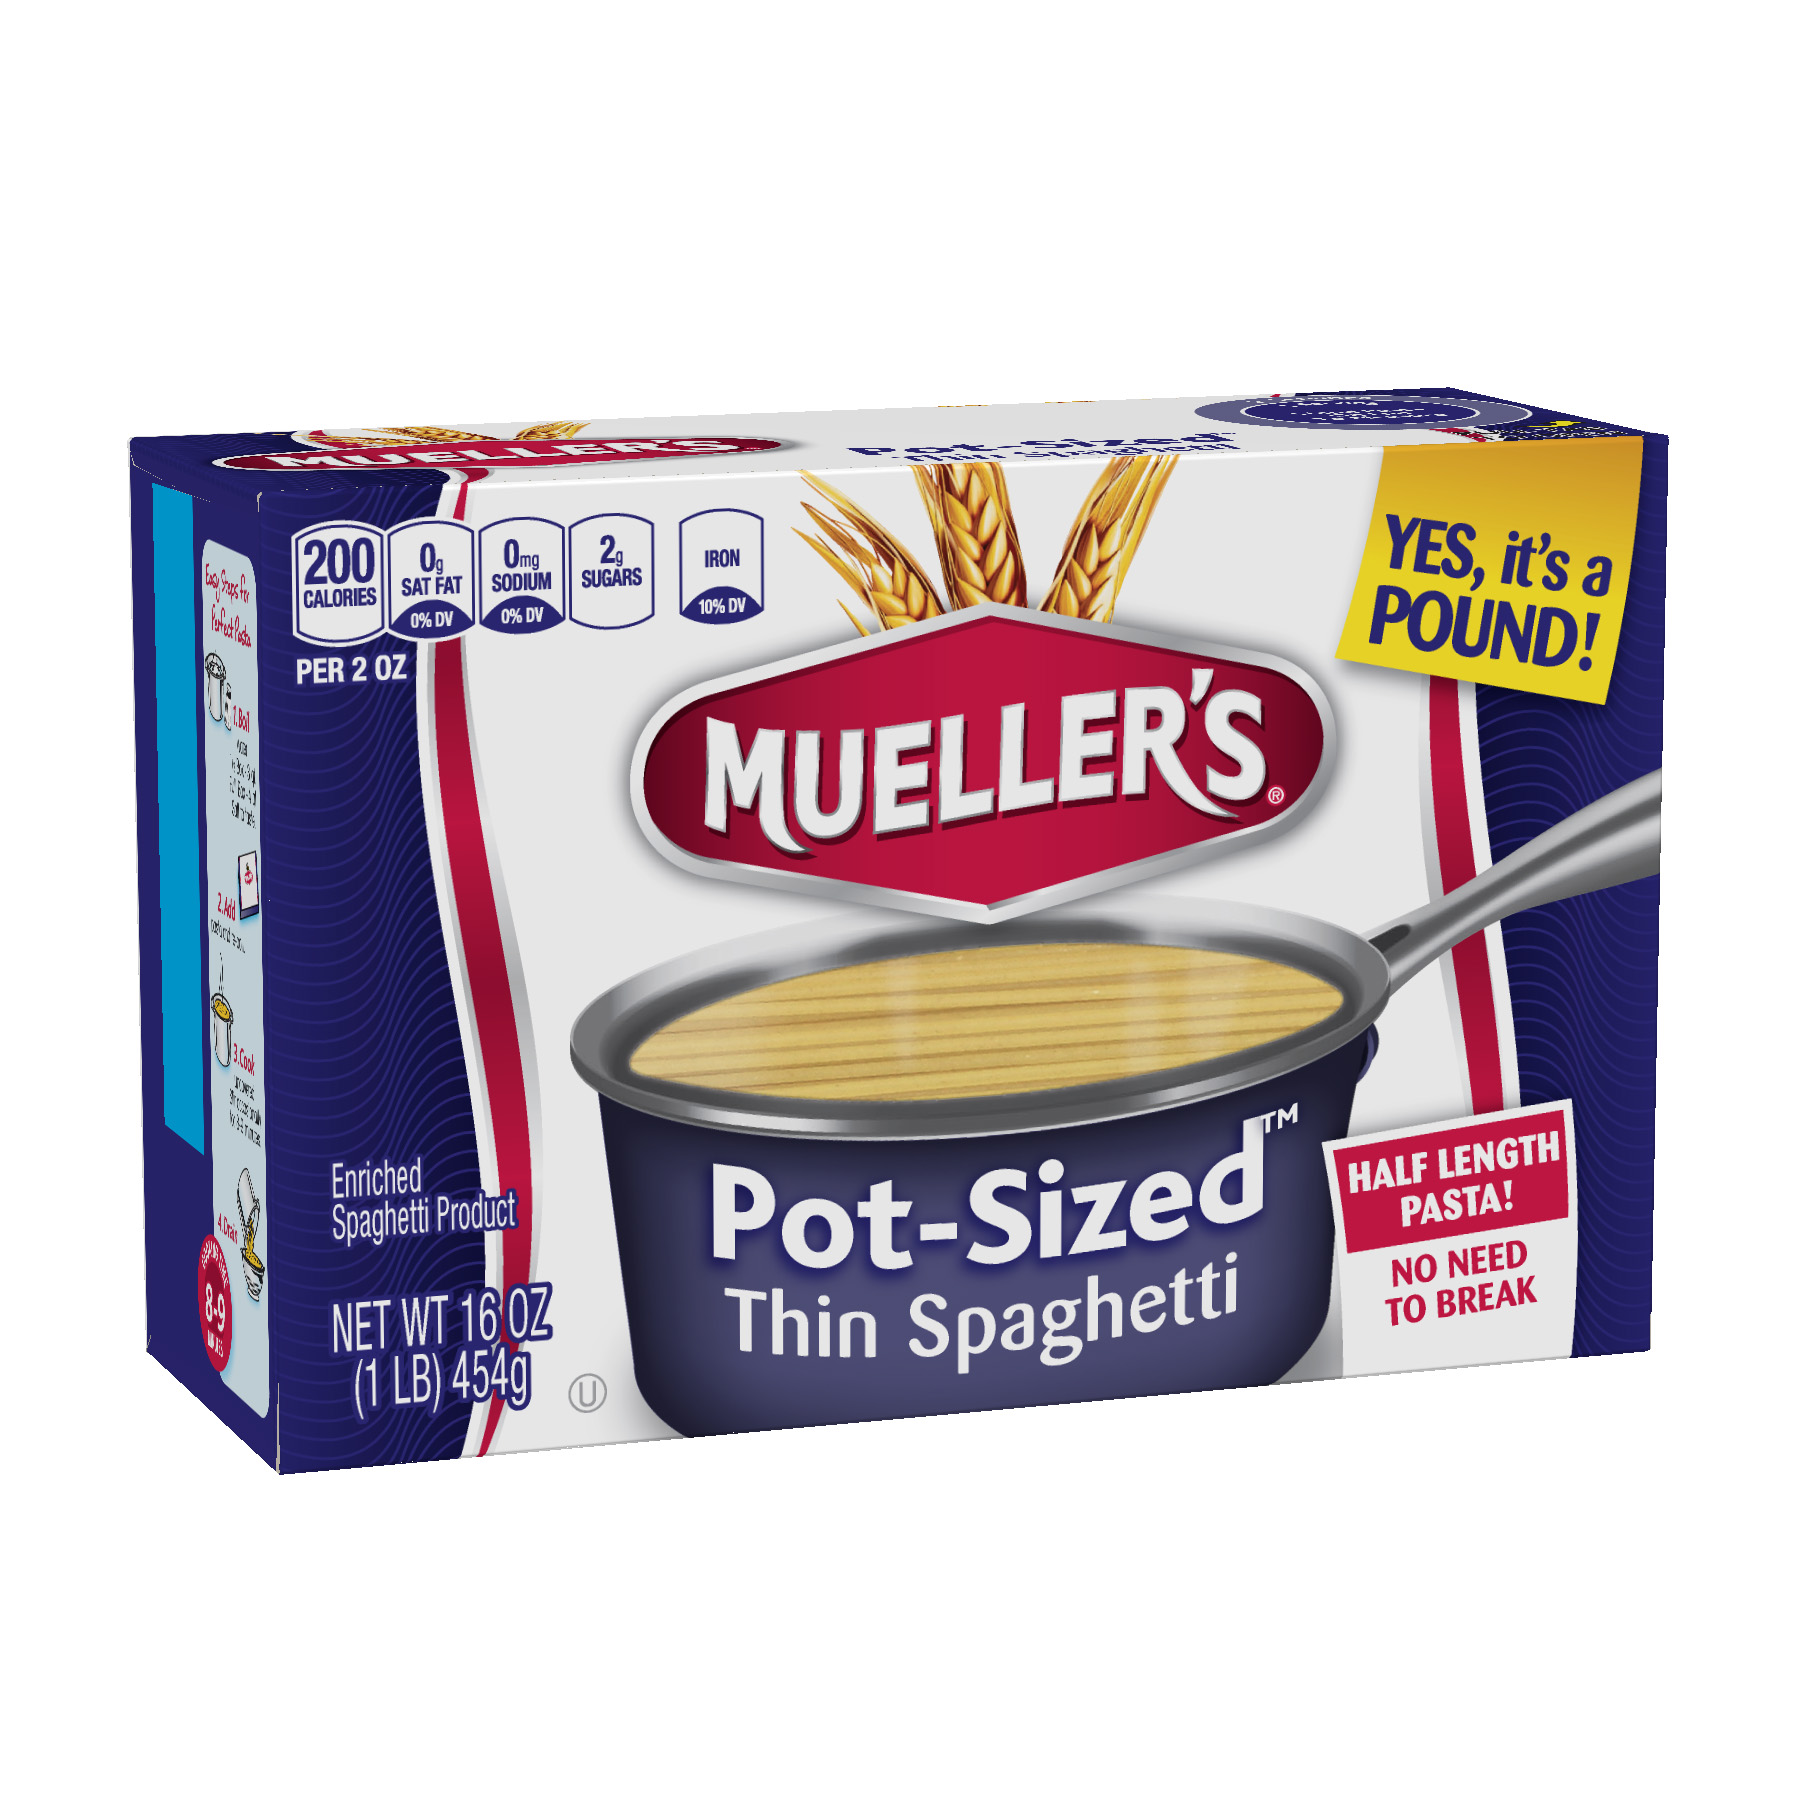 thin spaghetti pot-sized from muellers no need to break